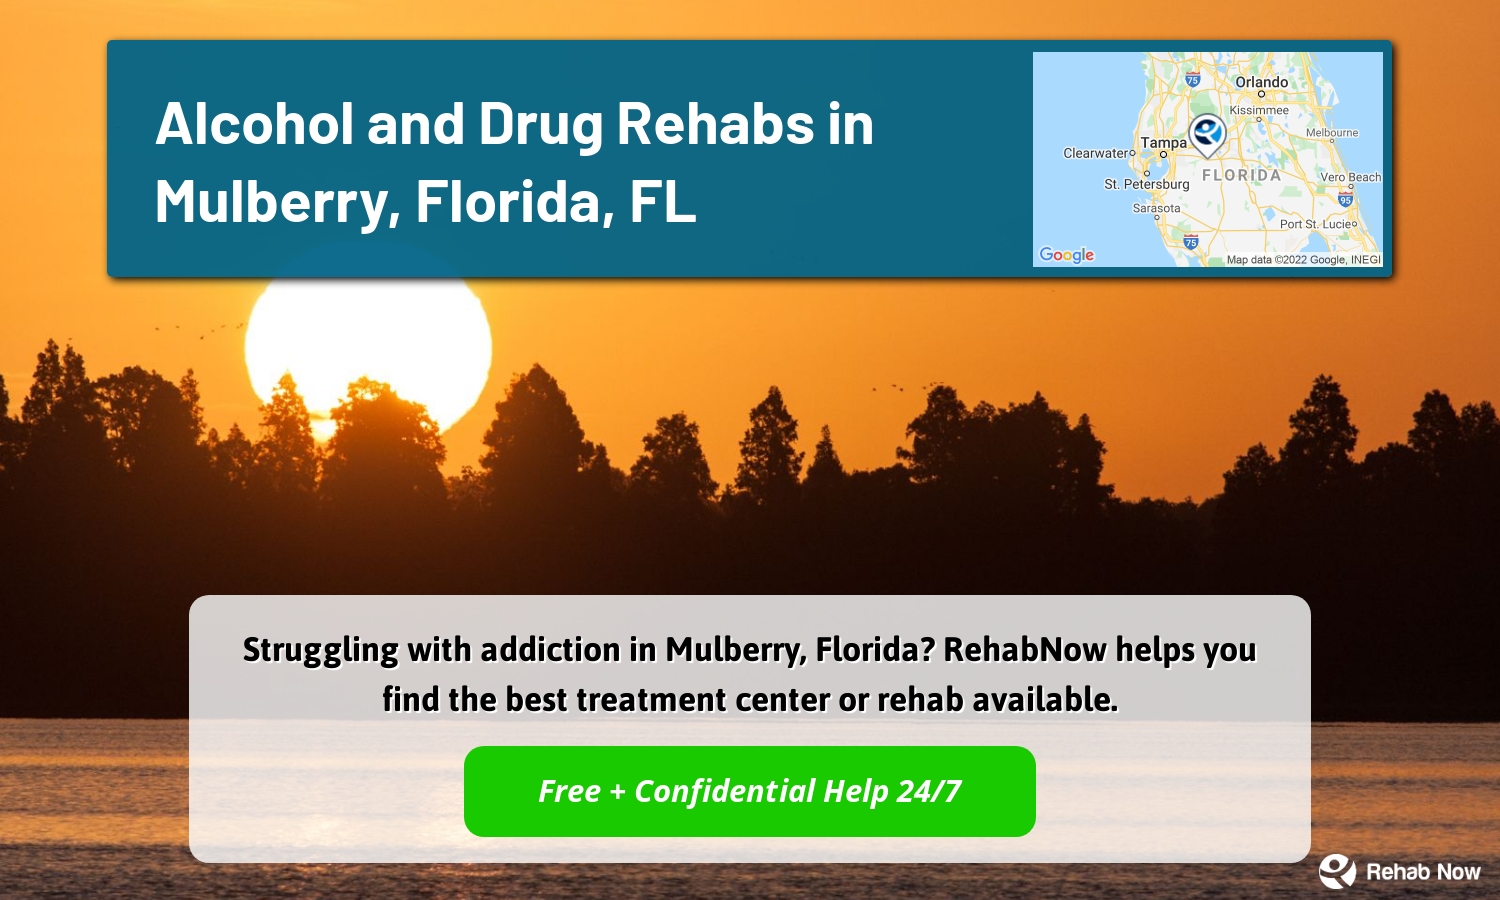 Struggling with addiction in Mulberry, Florida? RehabNow helps you find the best treatment center or rehab available.